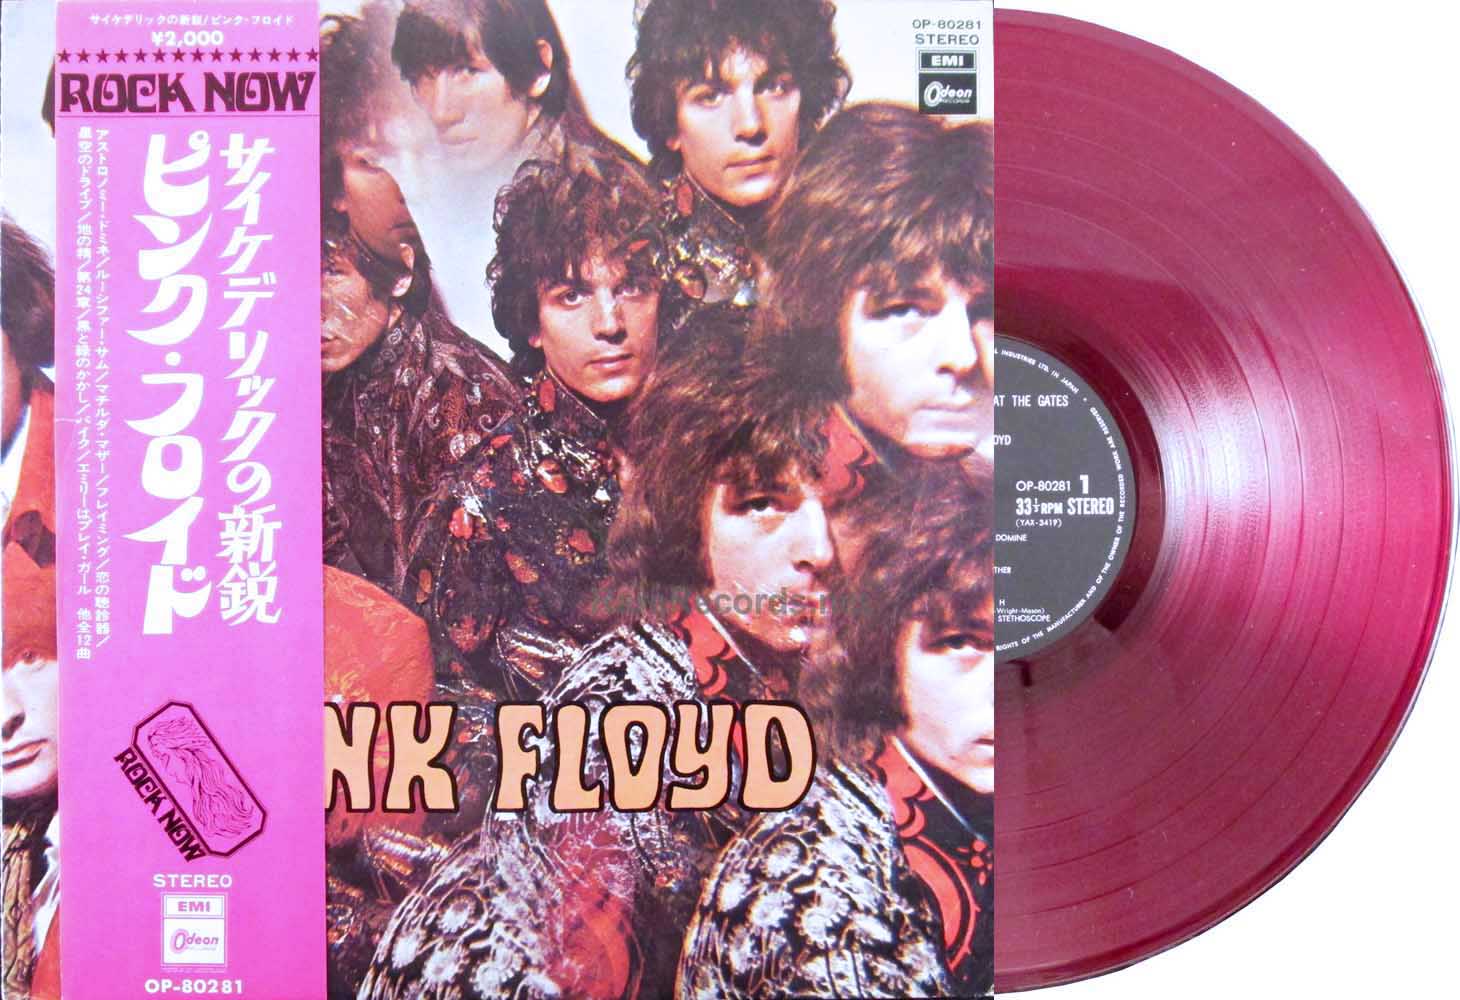 Pink – The Piper at the of 1970 Japan red vinyl with obi